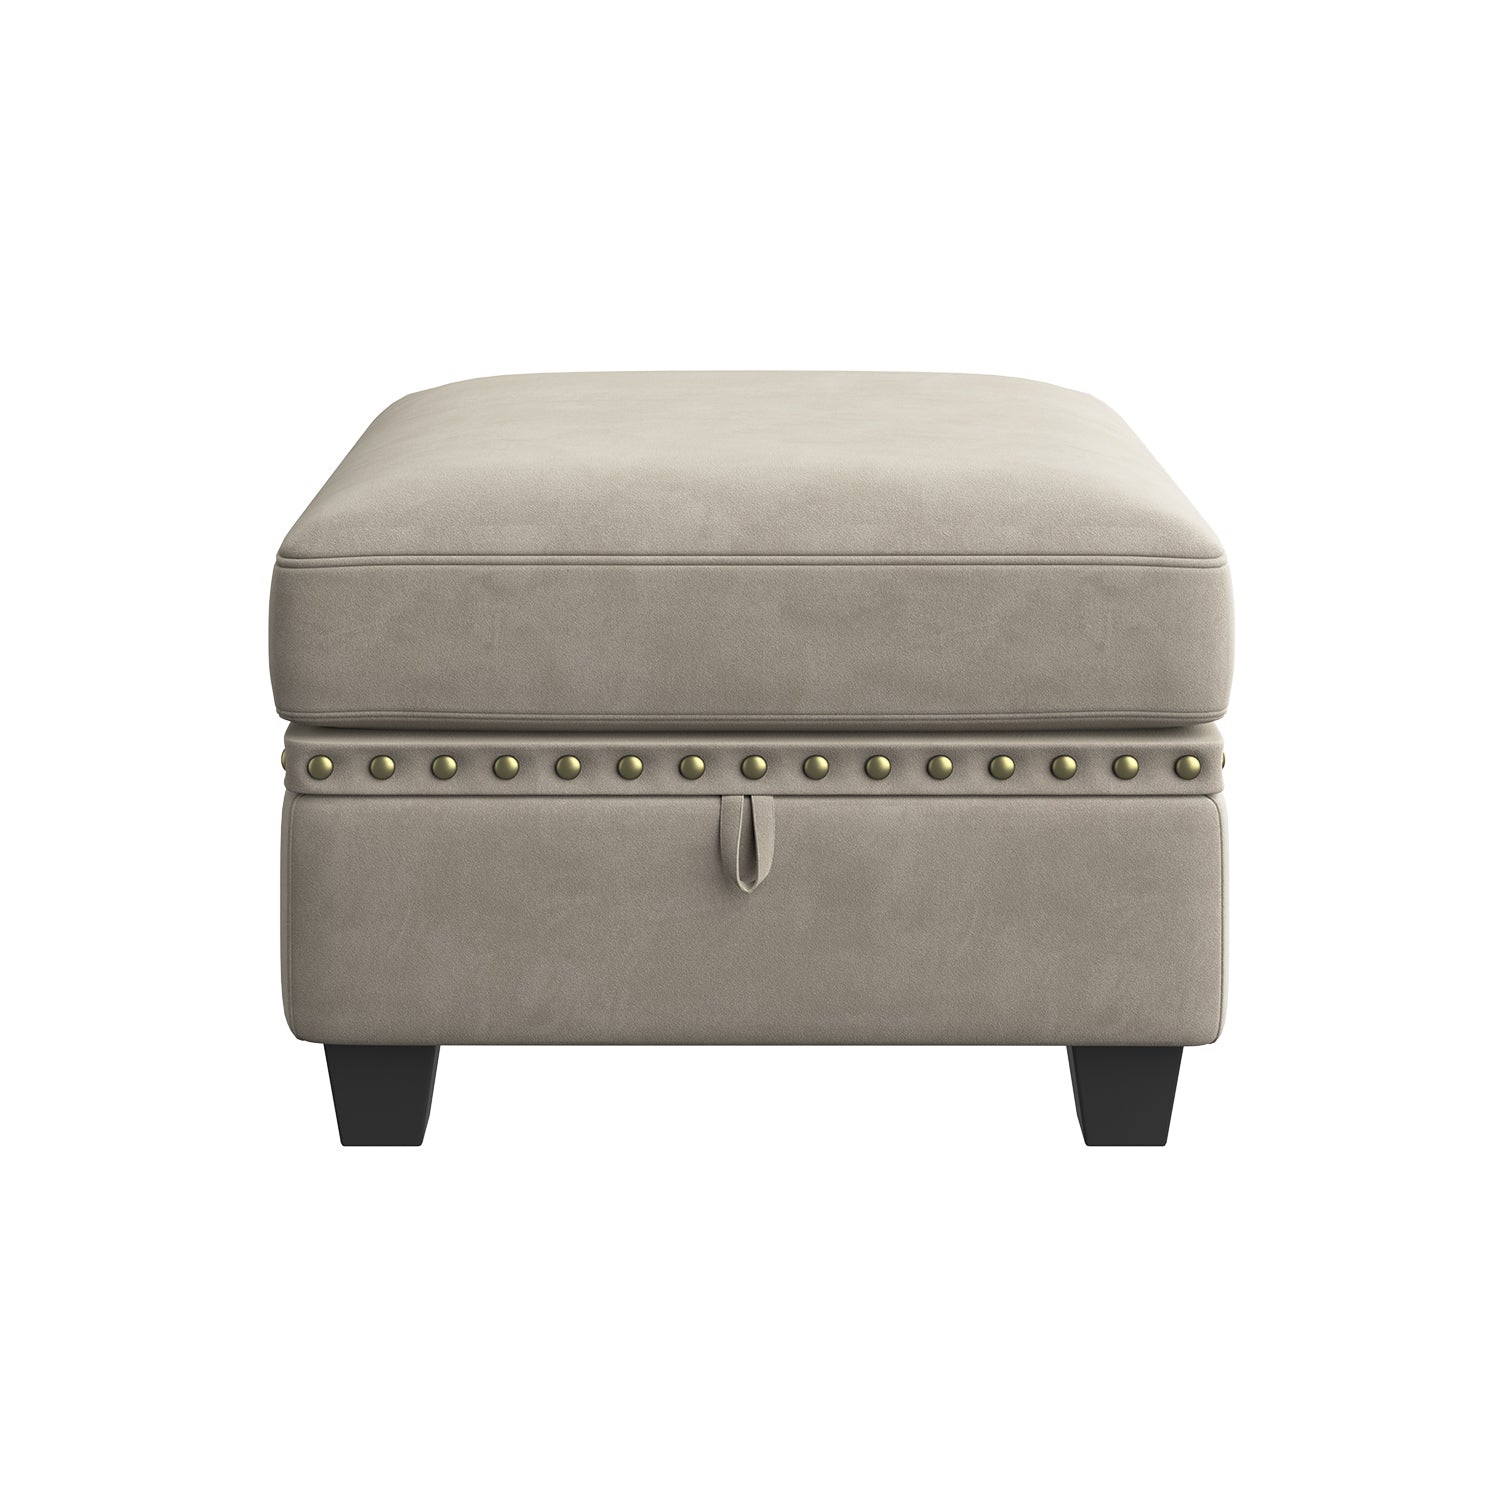 HONBAY Square Storage Ottoman for Sectional Sofa